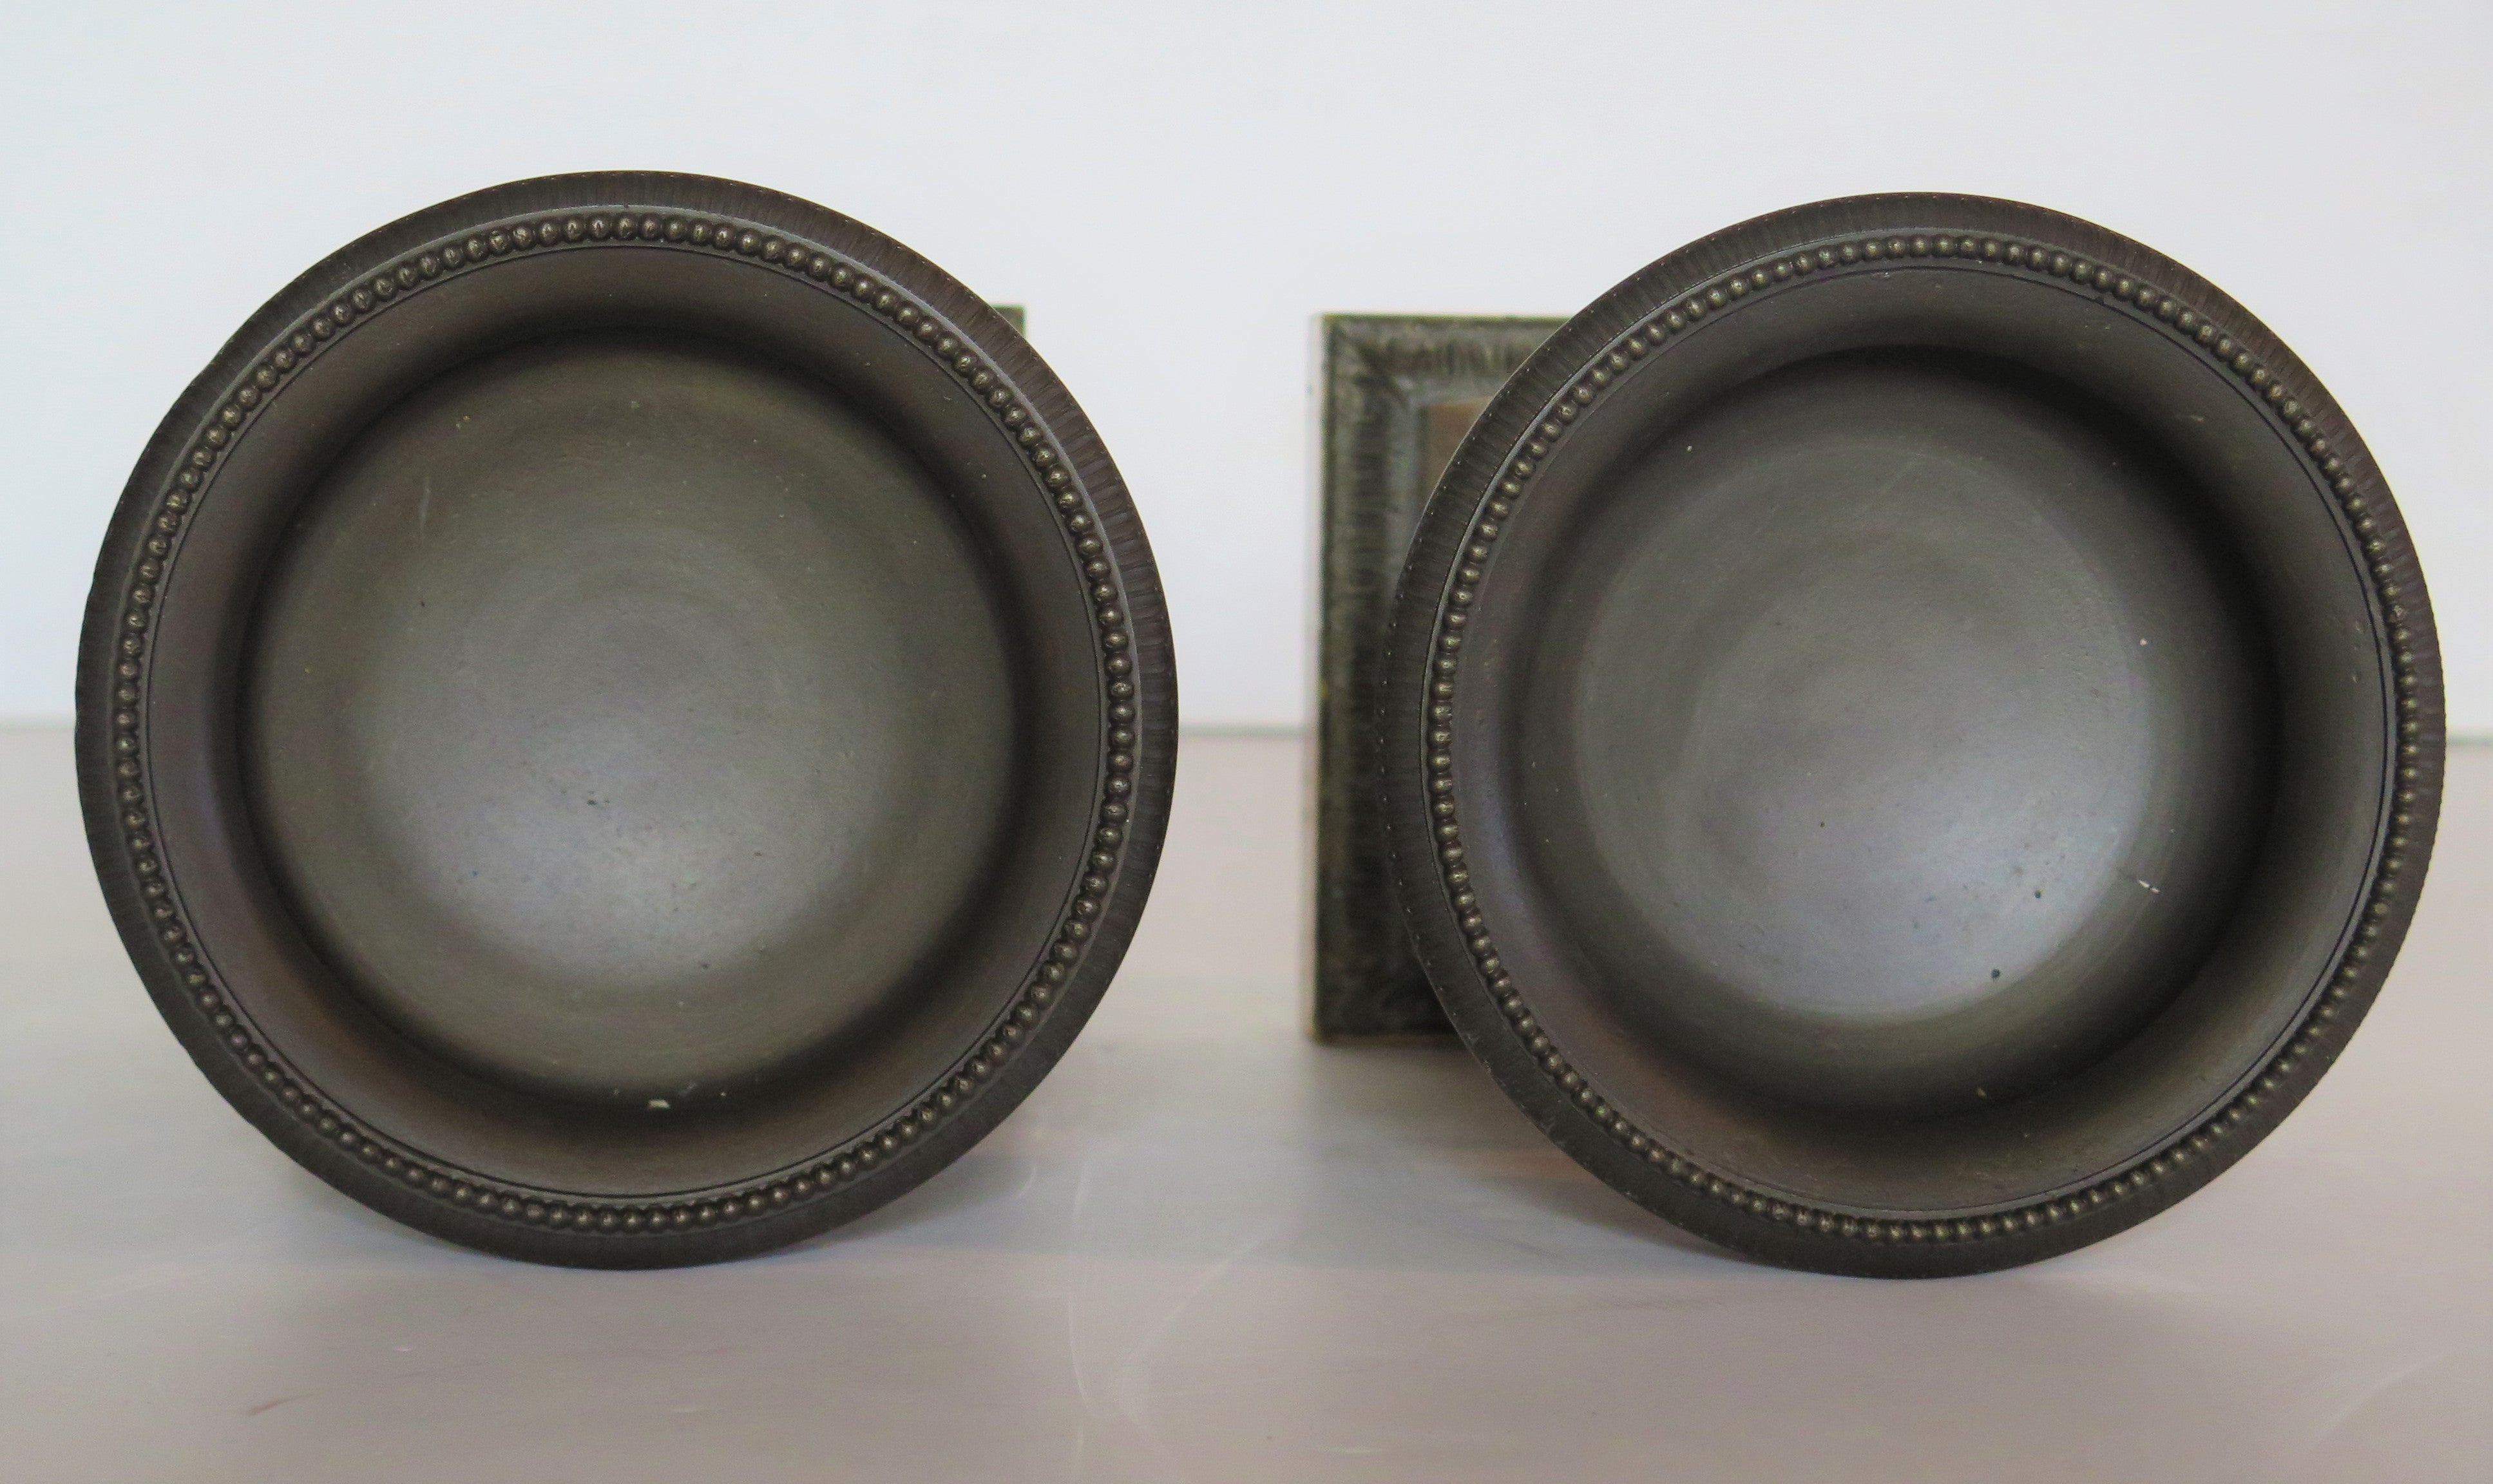 A Pair of Grand Tour Bronze Tazzas on Sienna Marble Plinths  C. 1820, Italy